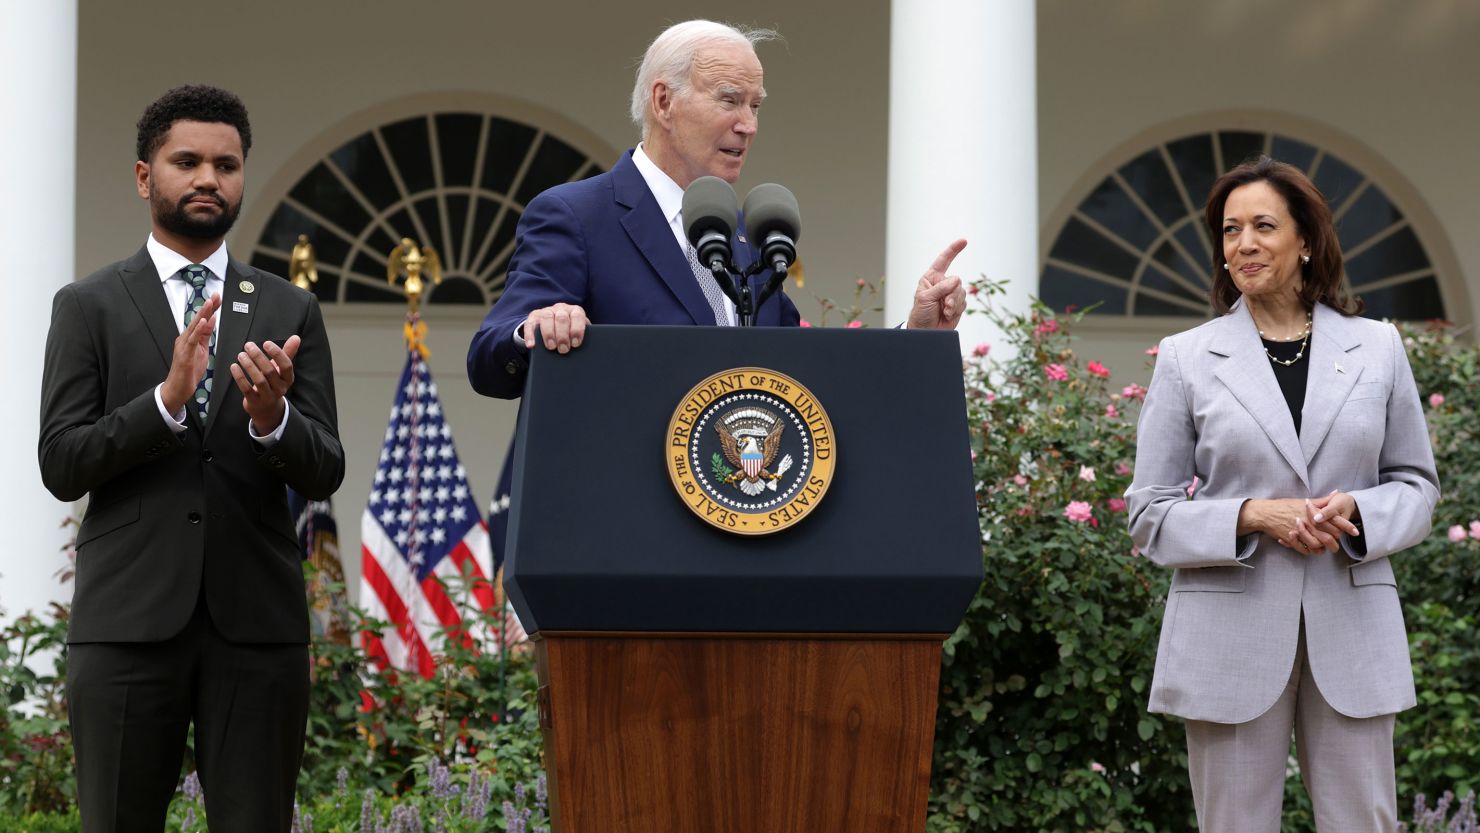 President Joe Biden speaks as  Rep. Maxwell Frost and Vice President Kamala Harris listen during a Rose Garden event on gun safety at the White House on September 22, 2023 in Washington, DC.